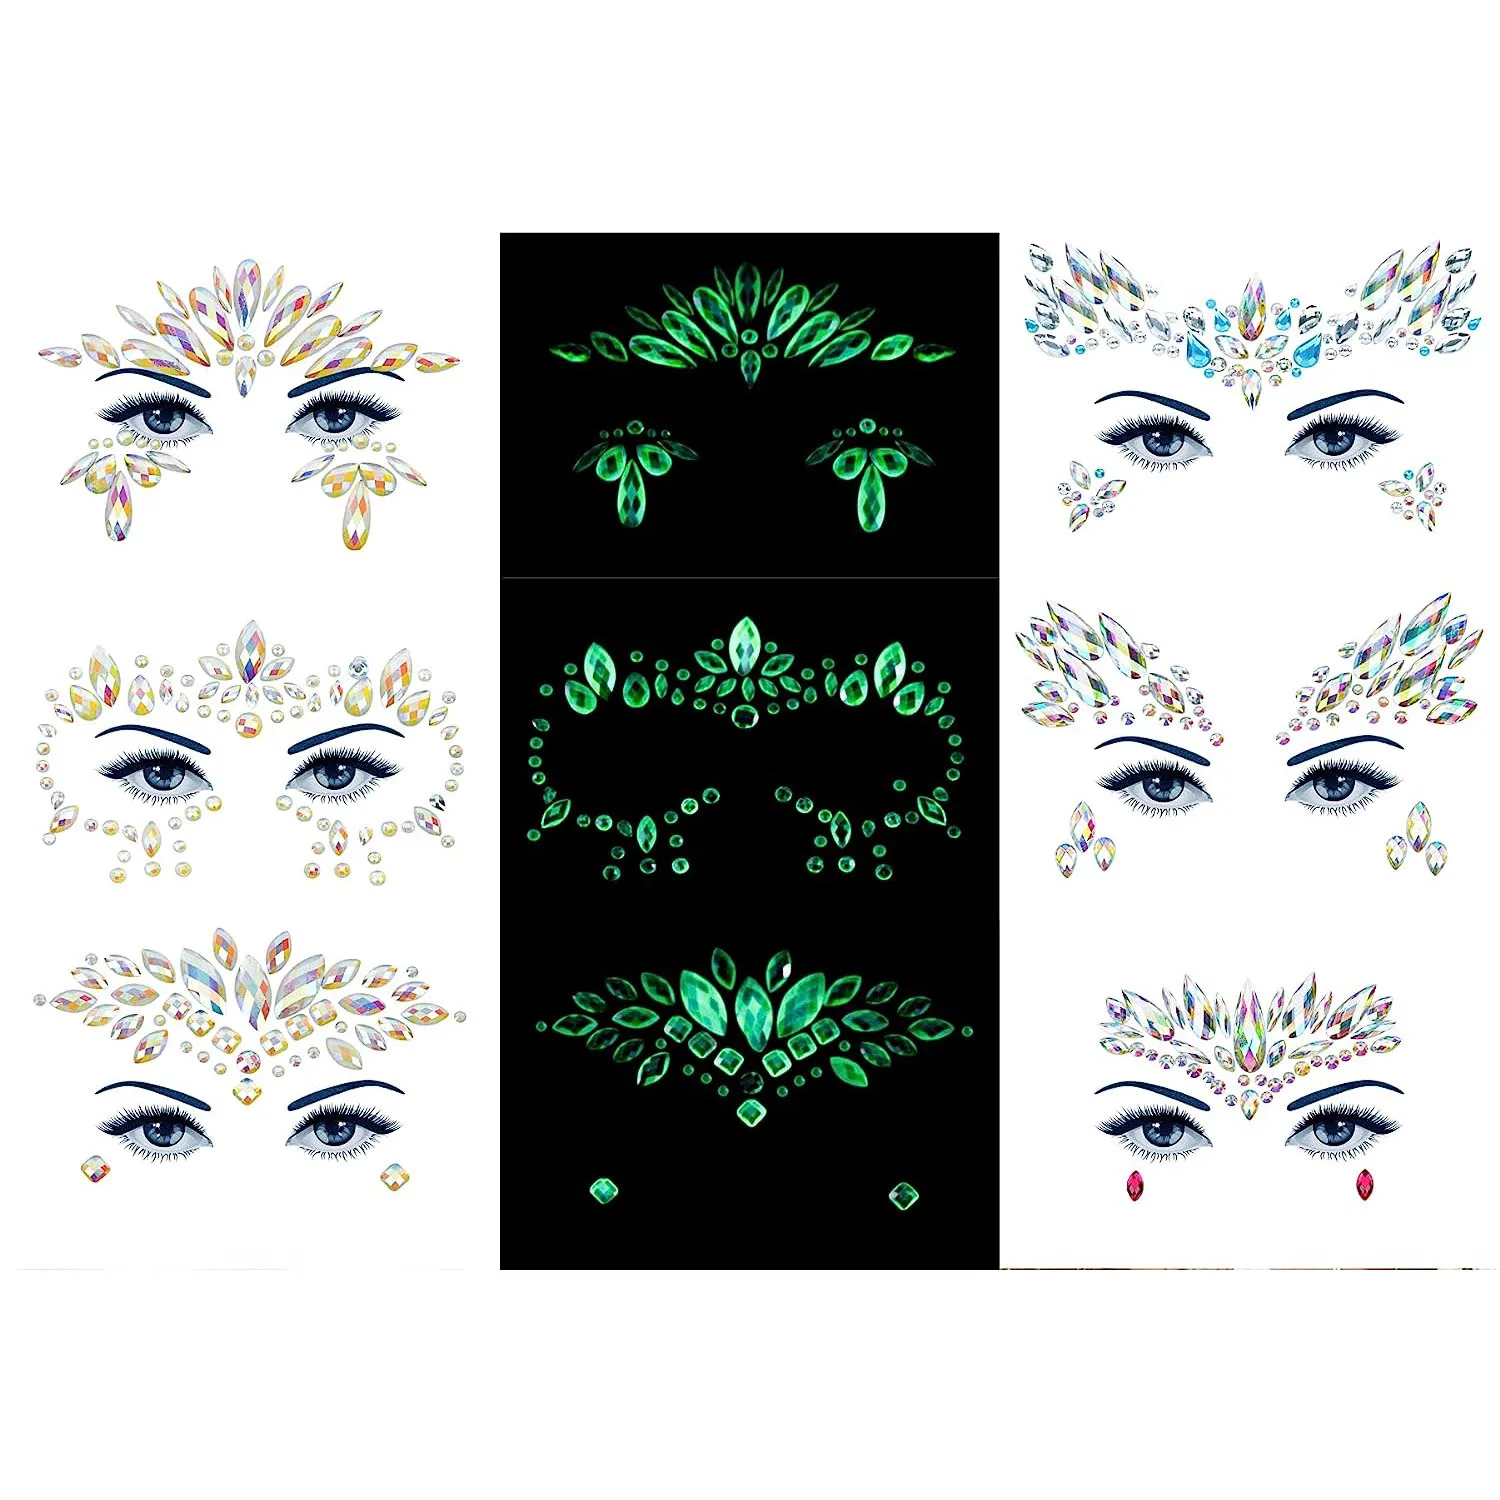 Face Gems-Face Jewels Stick On Rhinestones Stickers Chunky Glitter, Gemstones Temporary Tattoo Gifts for Women 9 sets diy face stickers gems mermaid face jewels stick on crystal rhinestone festival face gemstones stickers rainbow tears gem stones face temporary tattoos stickers for festival holiday costumes